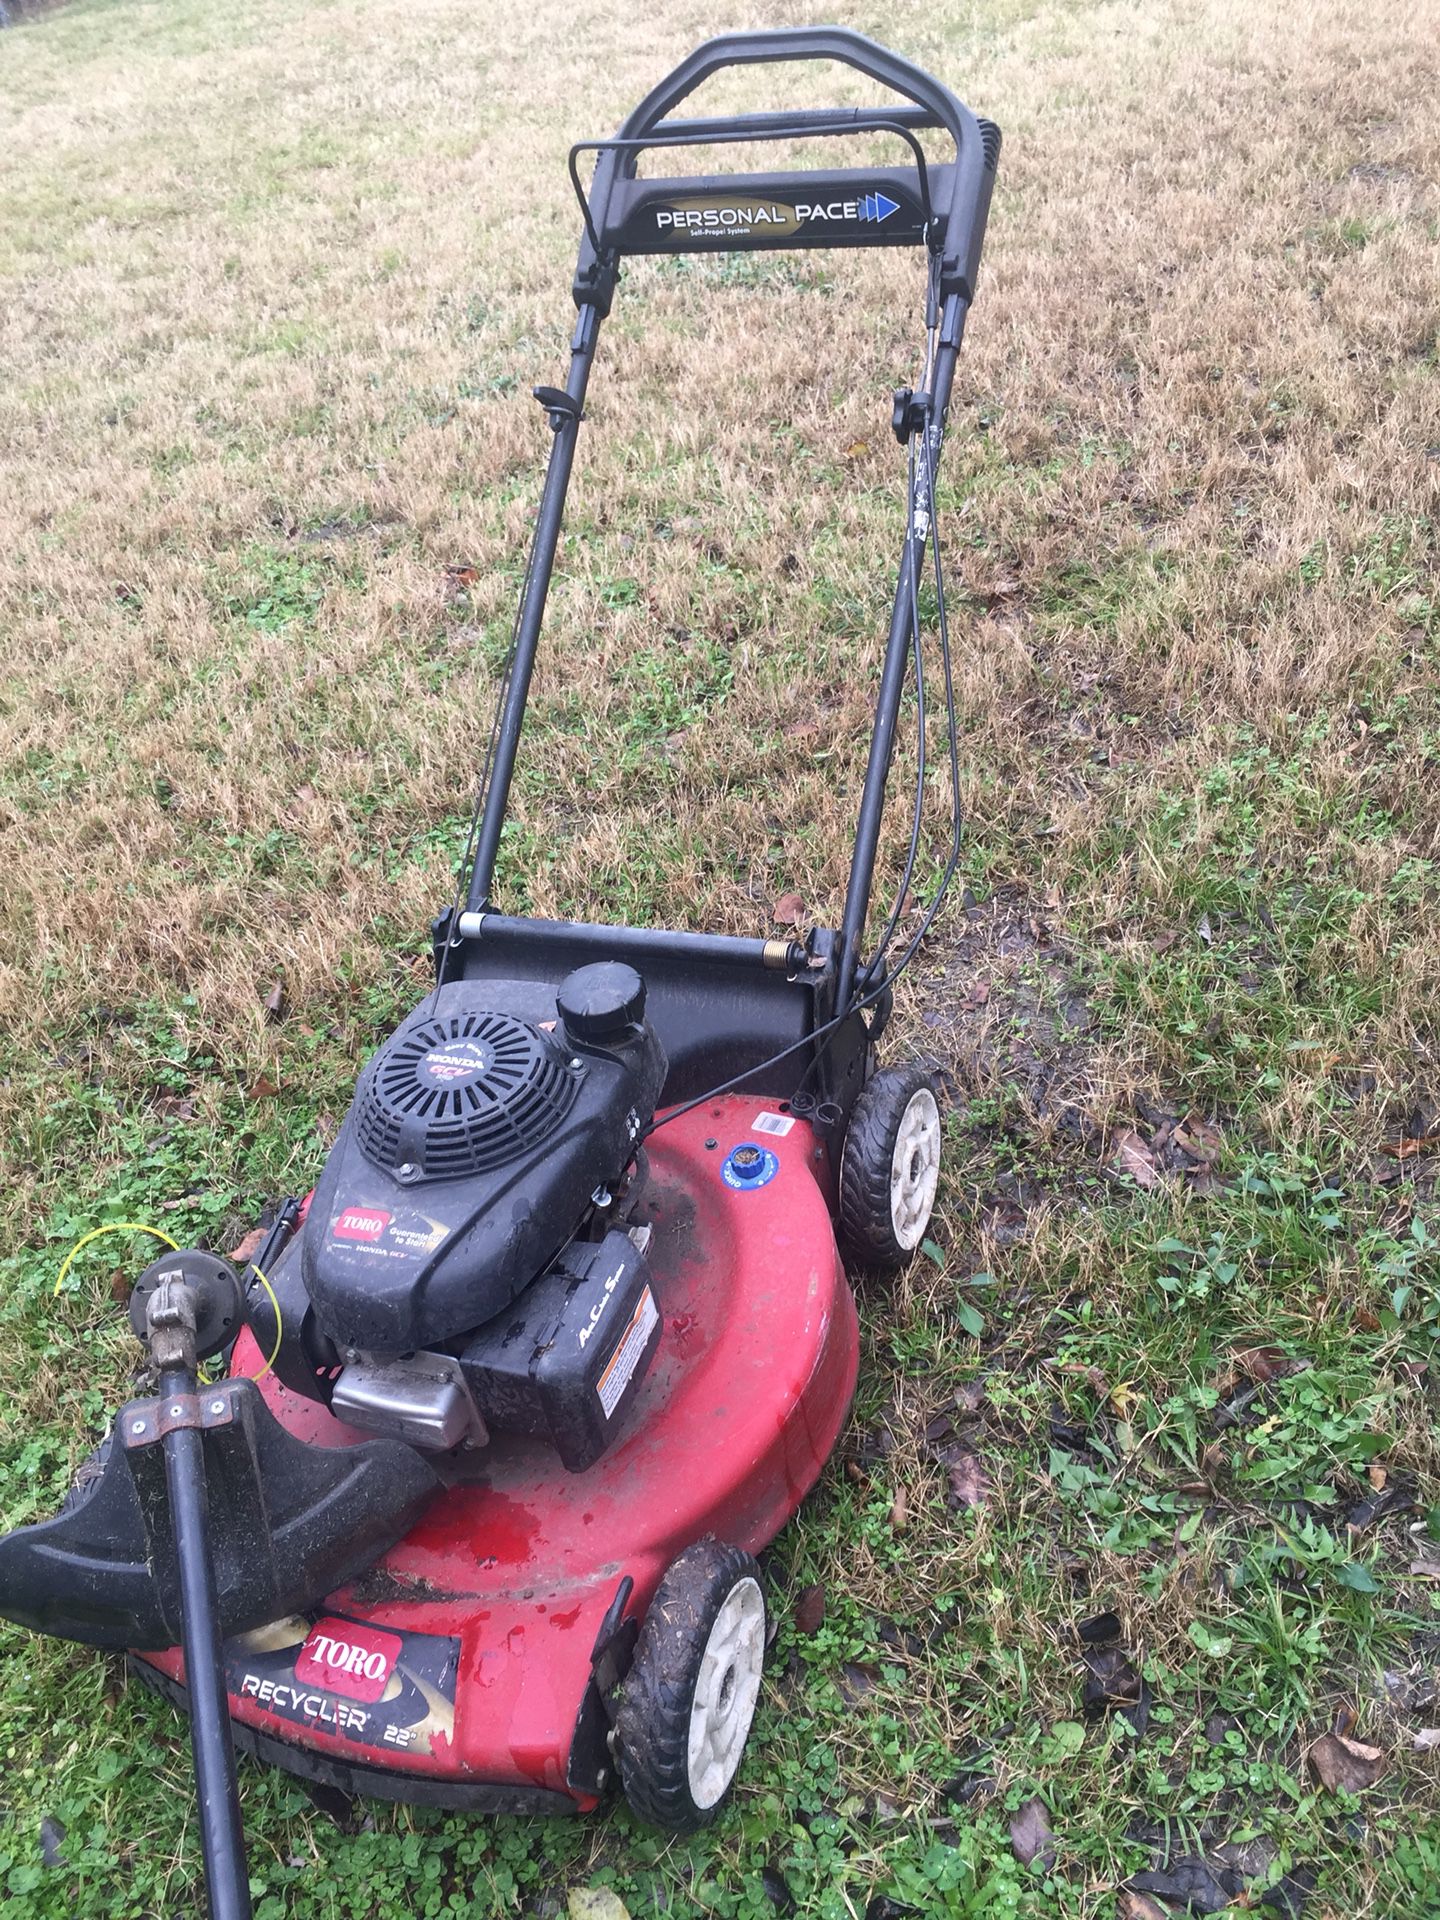 Transmission lawn mower and included weed eater